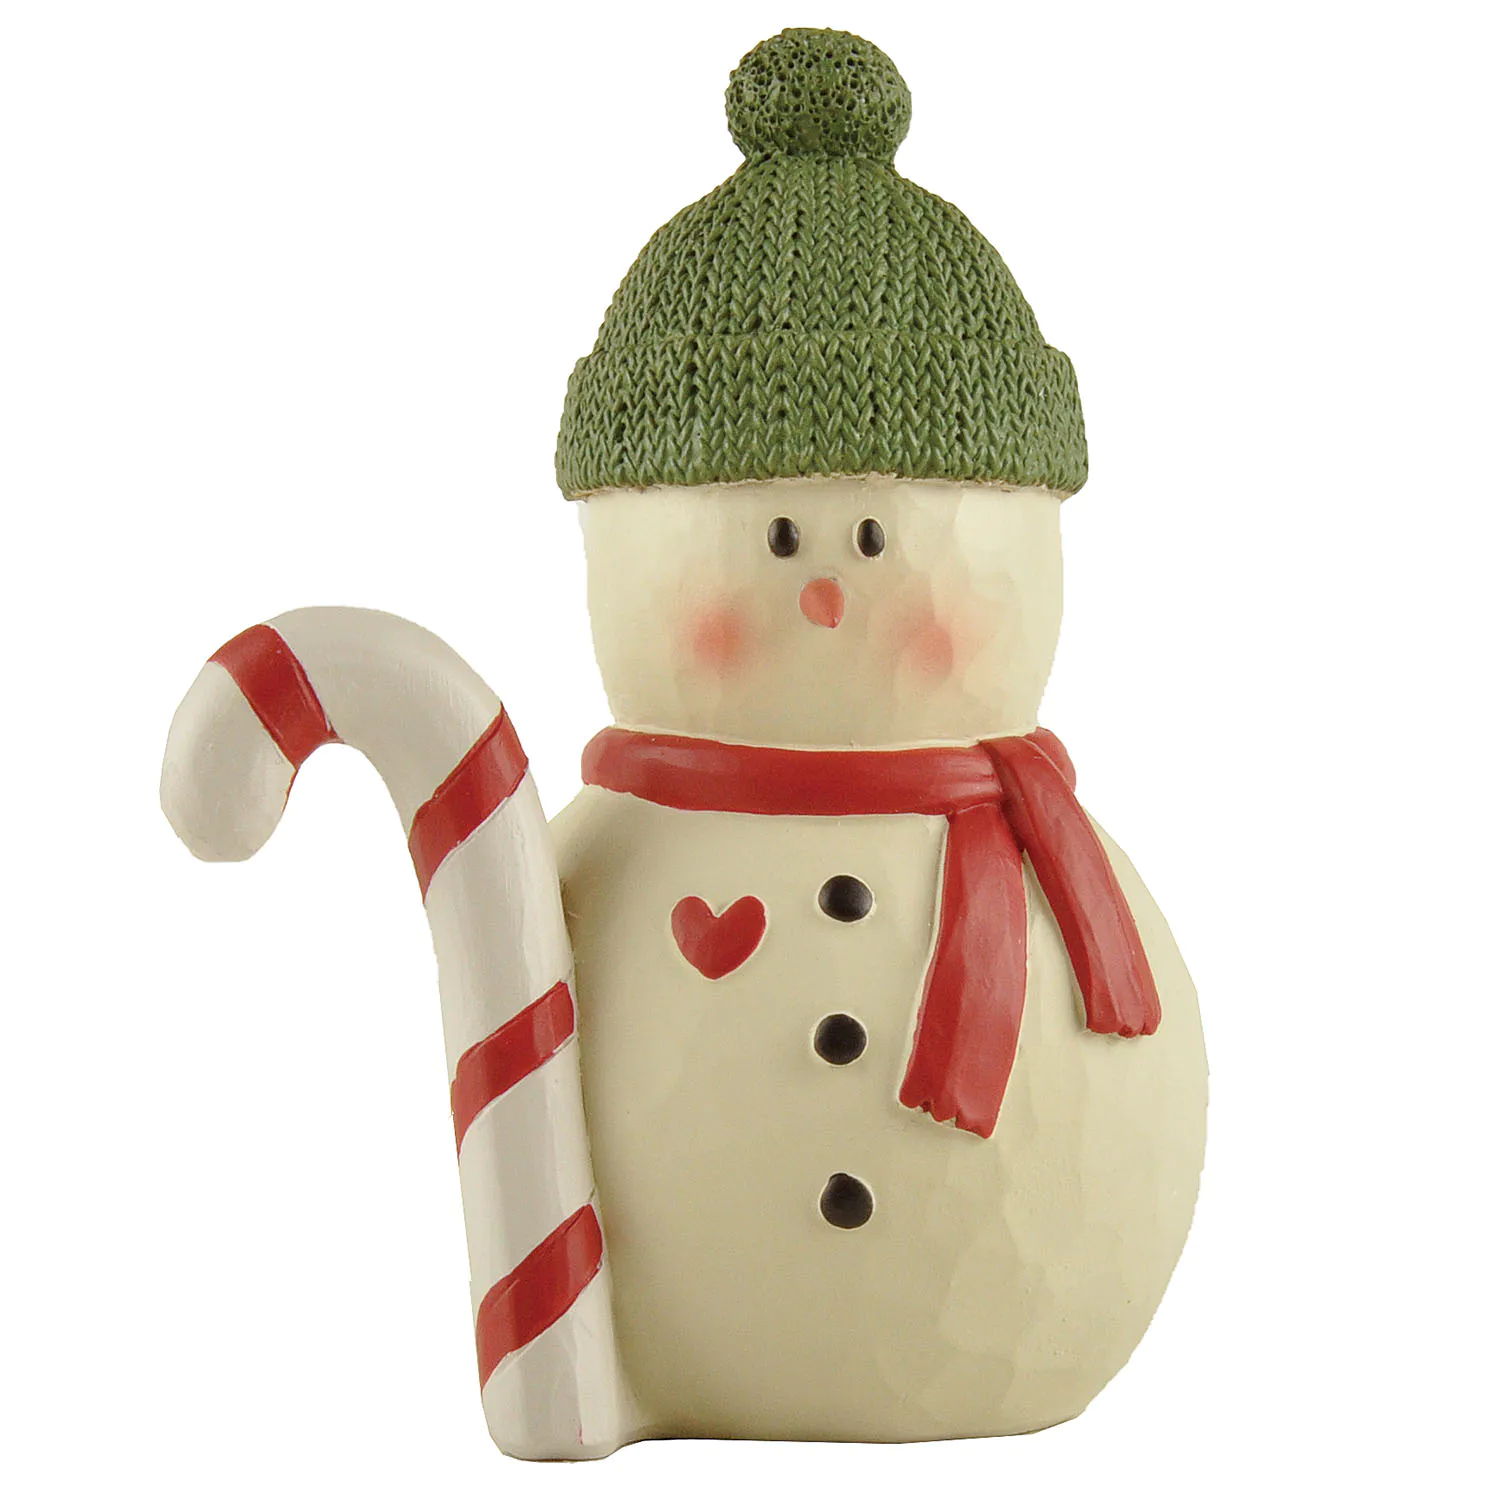 Christmas New Design Resin Snowman Crafts Green Hat Snoaman w Candy Cane for Home Decoration 238-13746